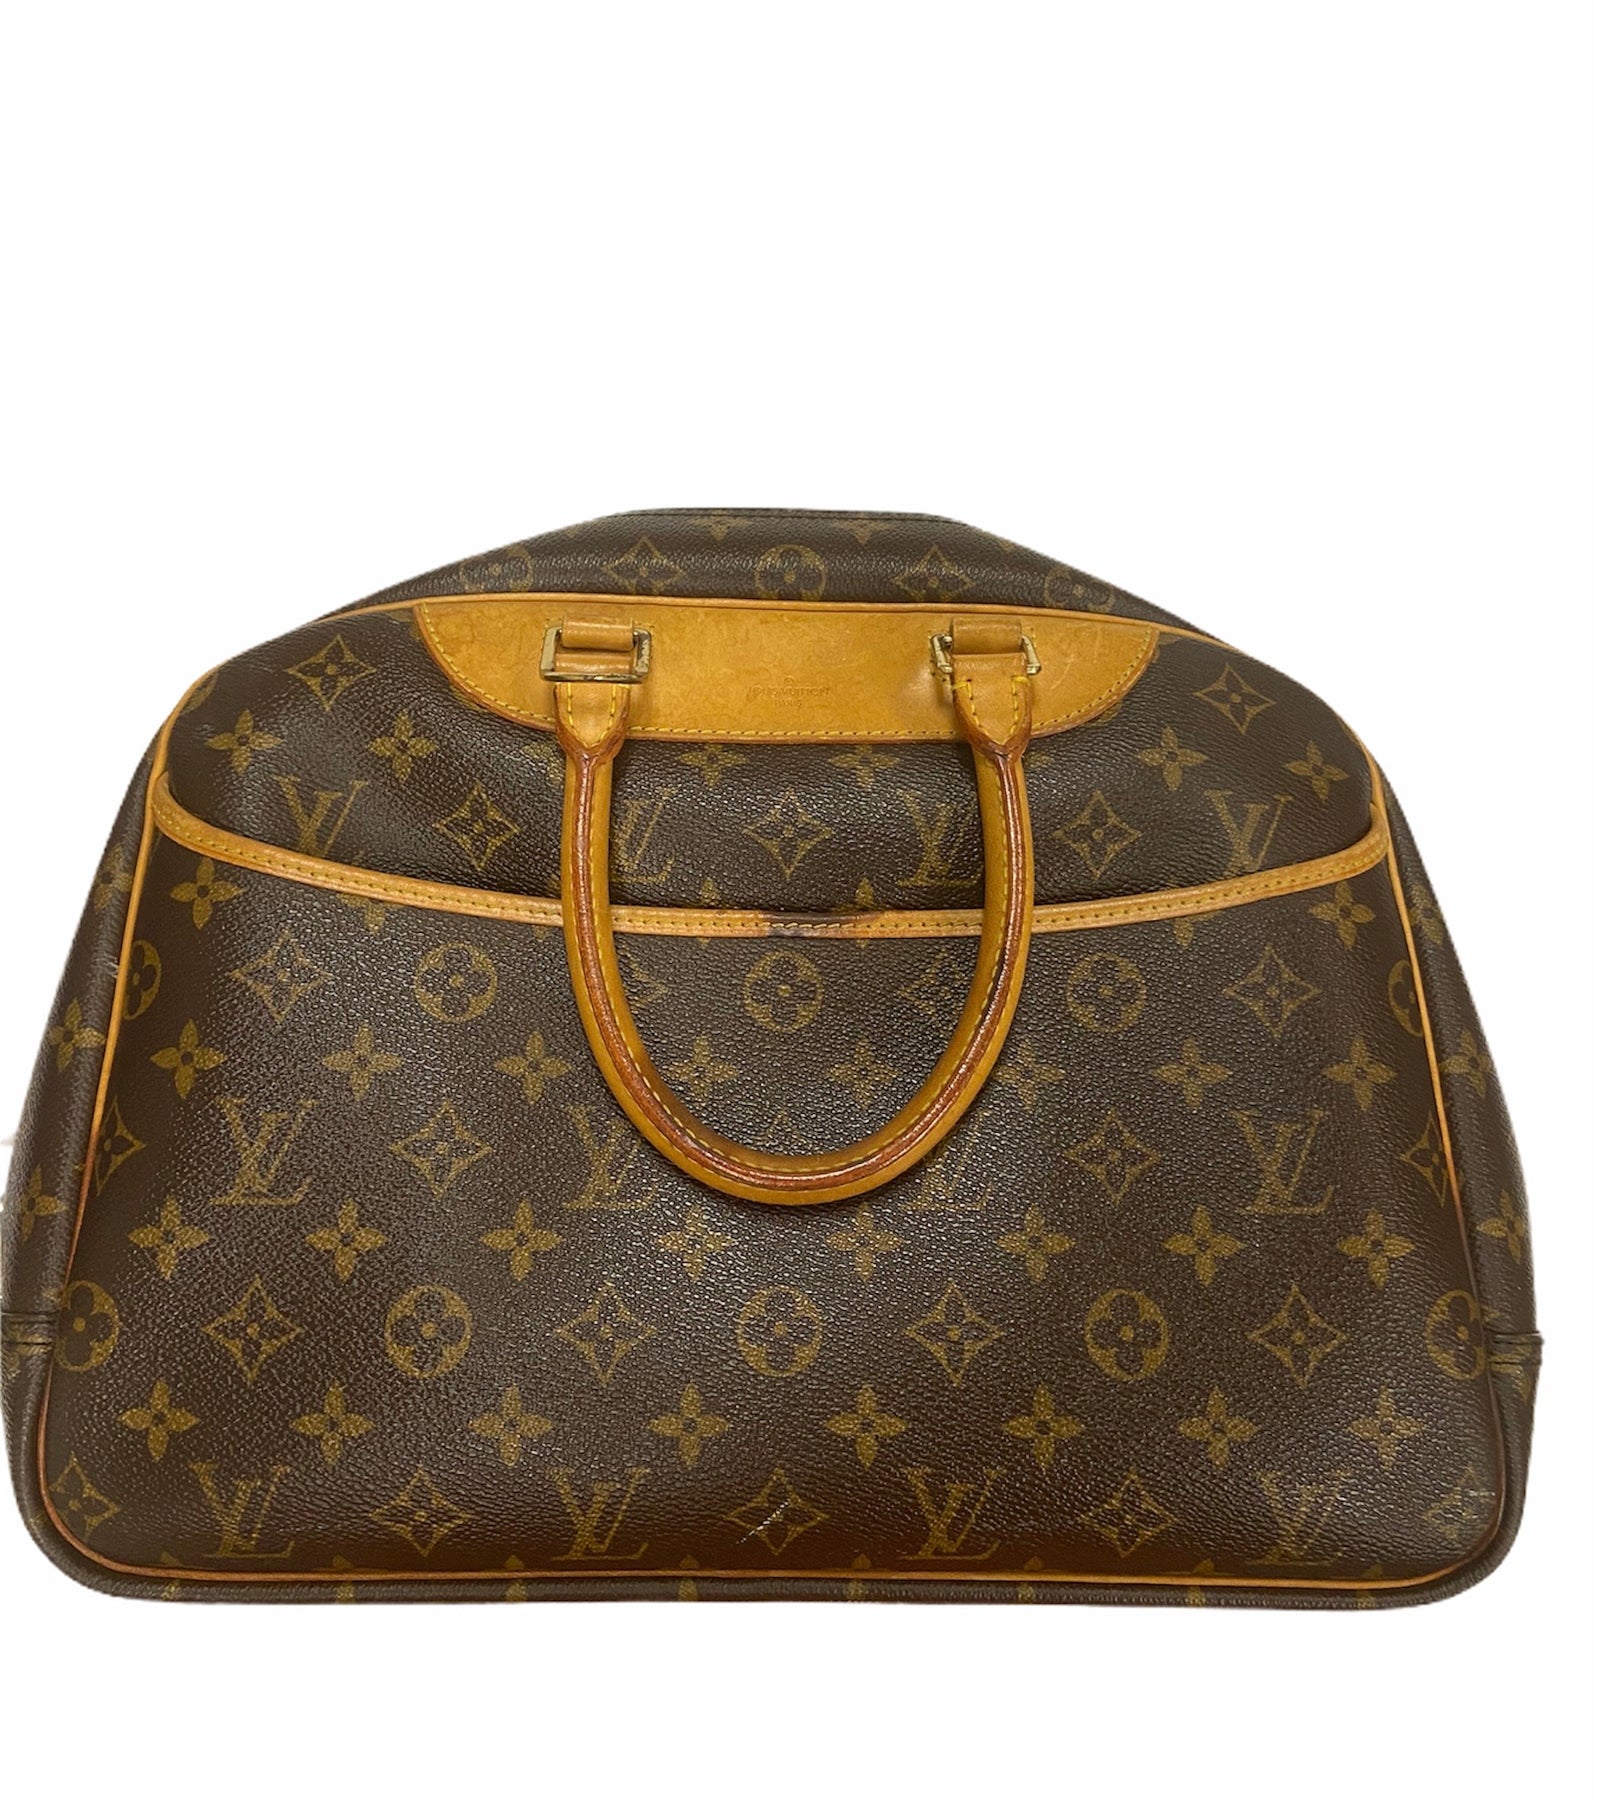 Best of the best sellers The Louis Vuitton Handbag ( flax, laundry,  lingerie, bedding, lin, linge, flaxseed, whatnot, linseed, clothing, cloth,  linen